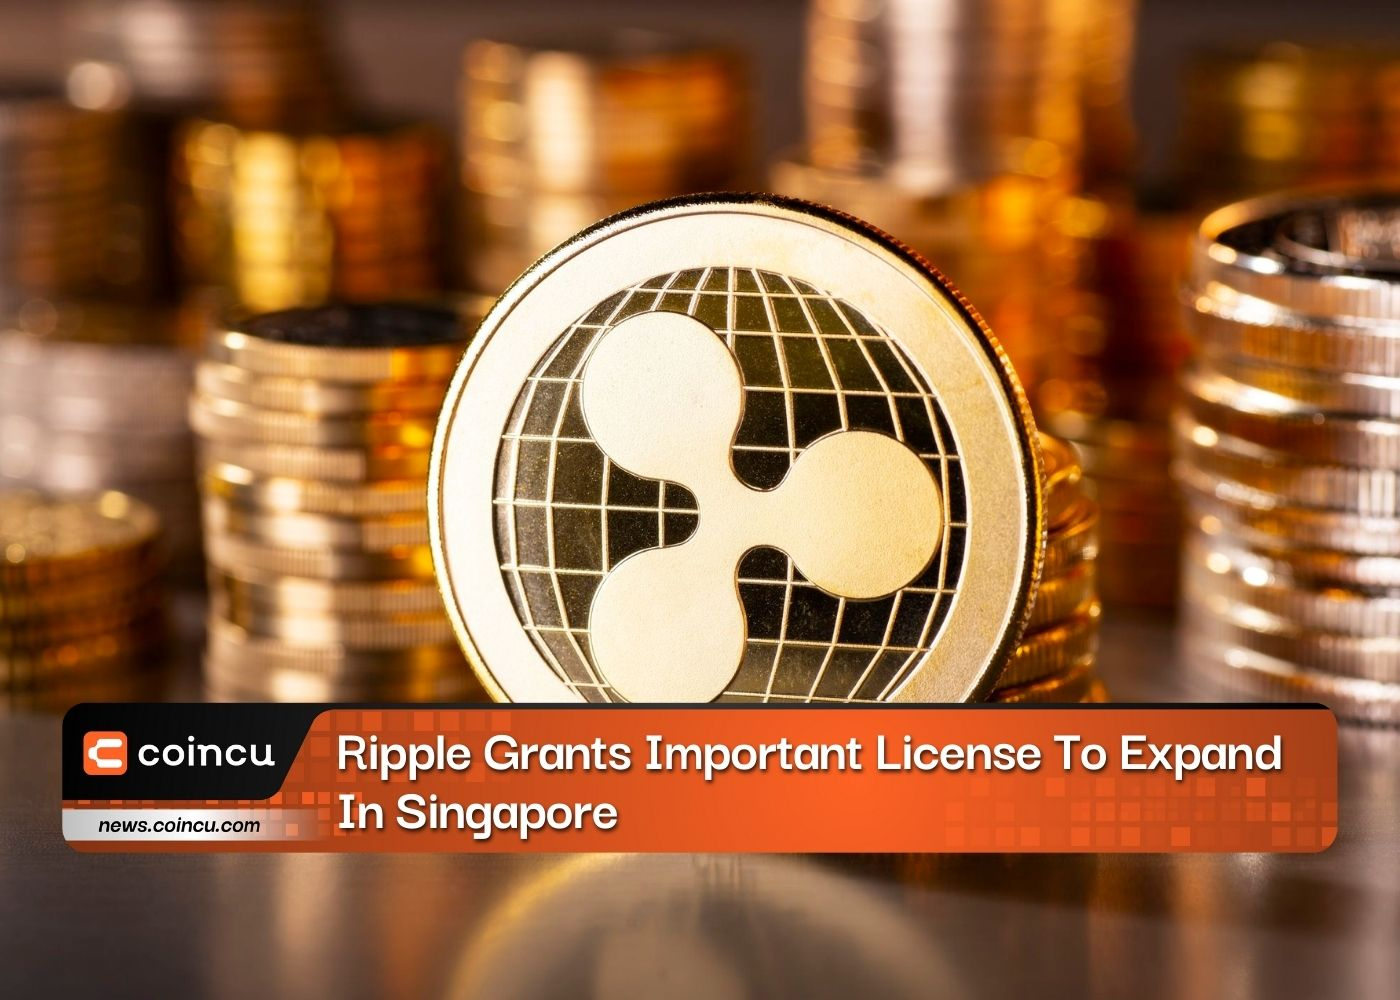 Ripple Grants Important License To Expand In Singapore